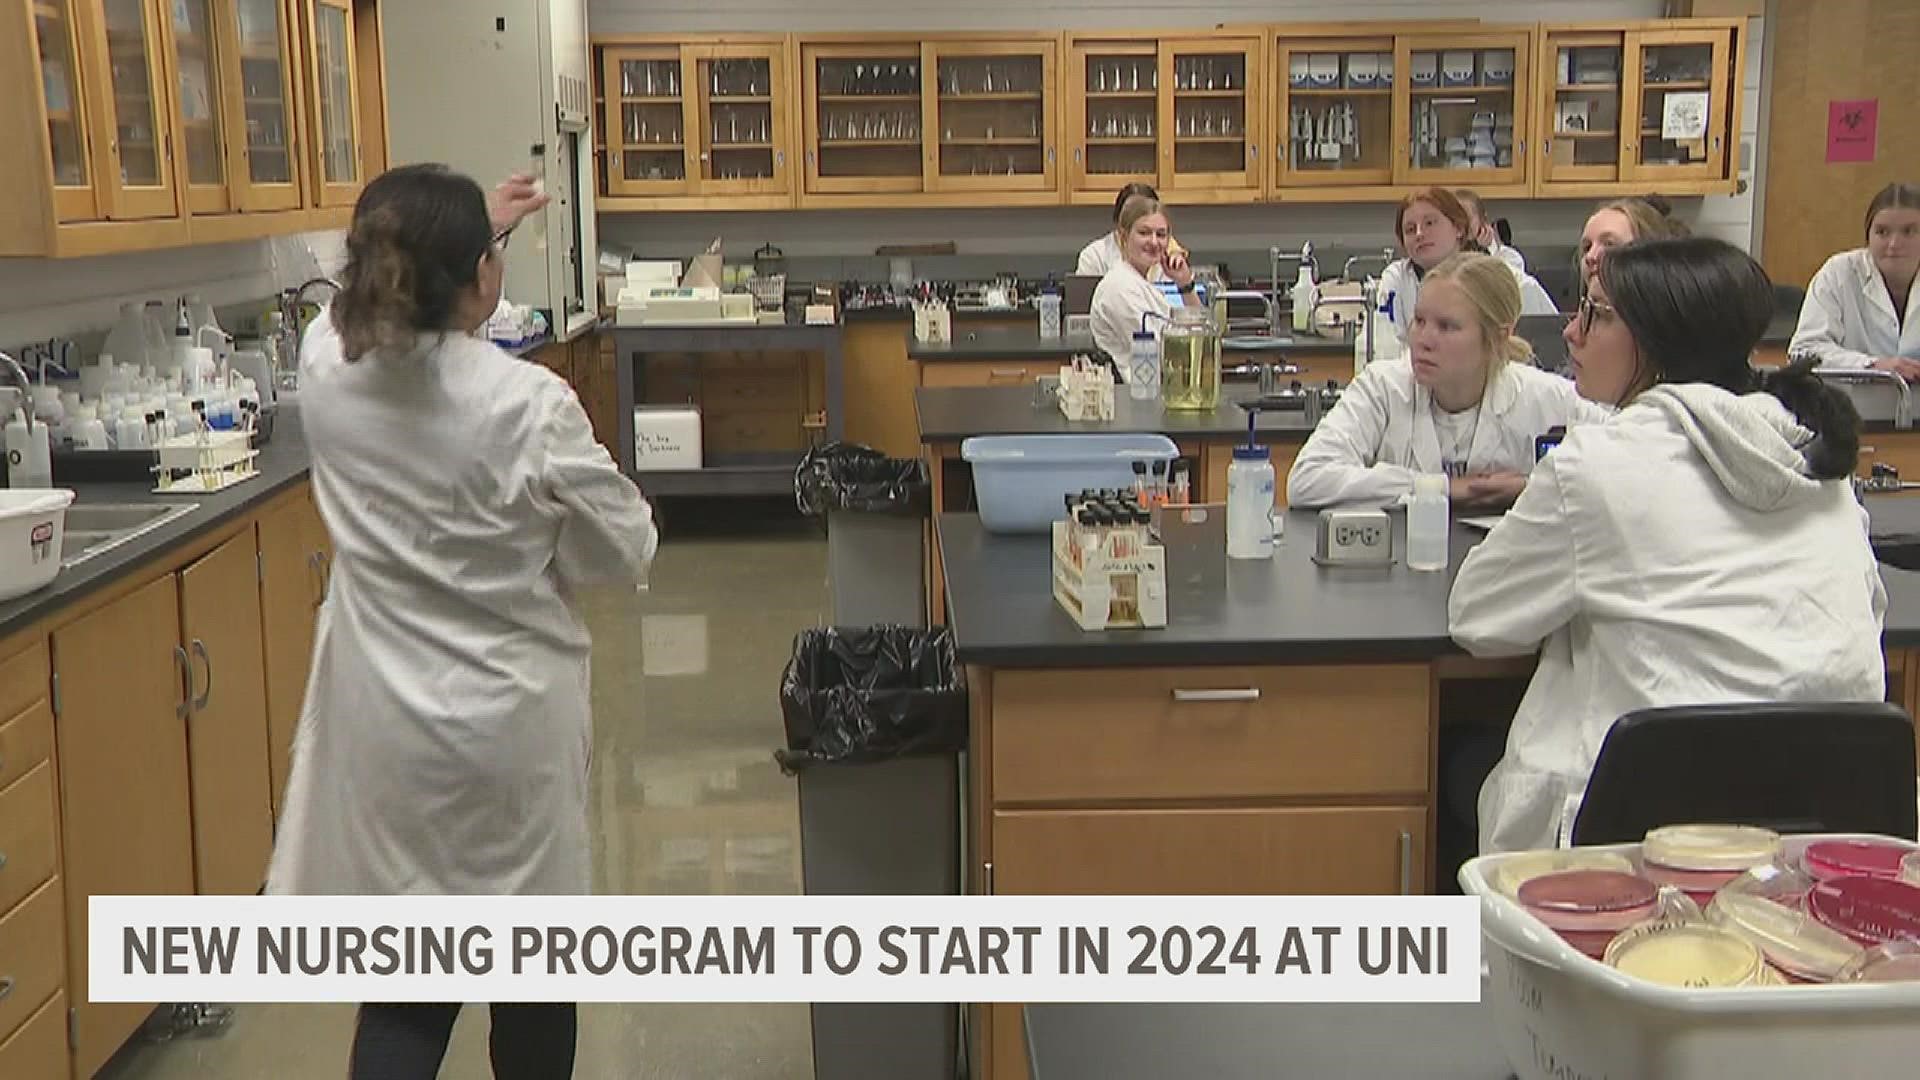 Spurred on by a growing nurse shortage across the country, UNI officials say the new program will be just what Iowa health care needs.